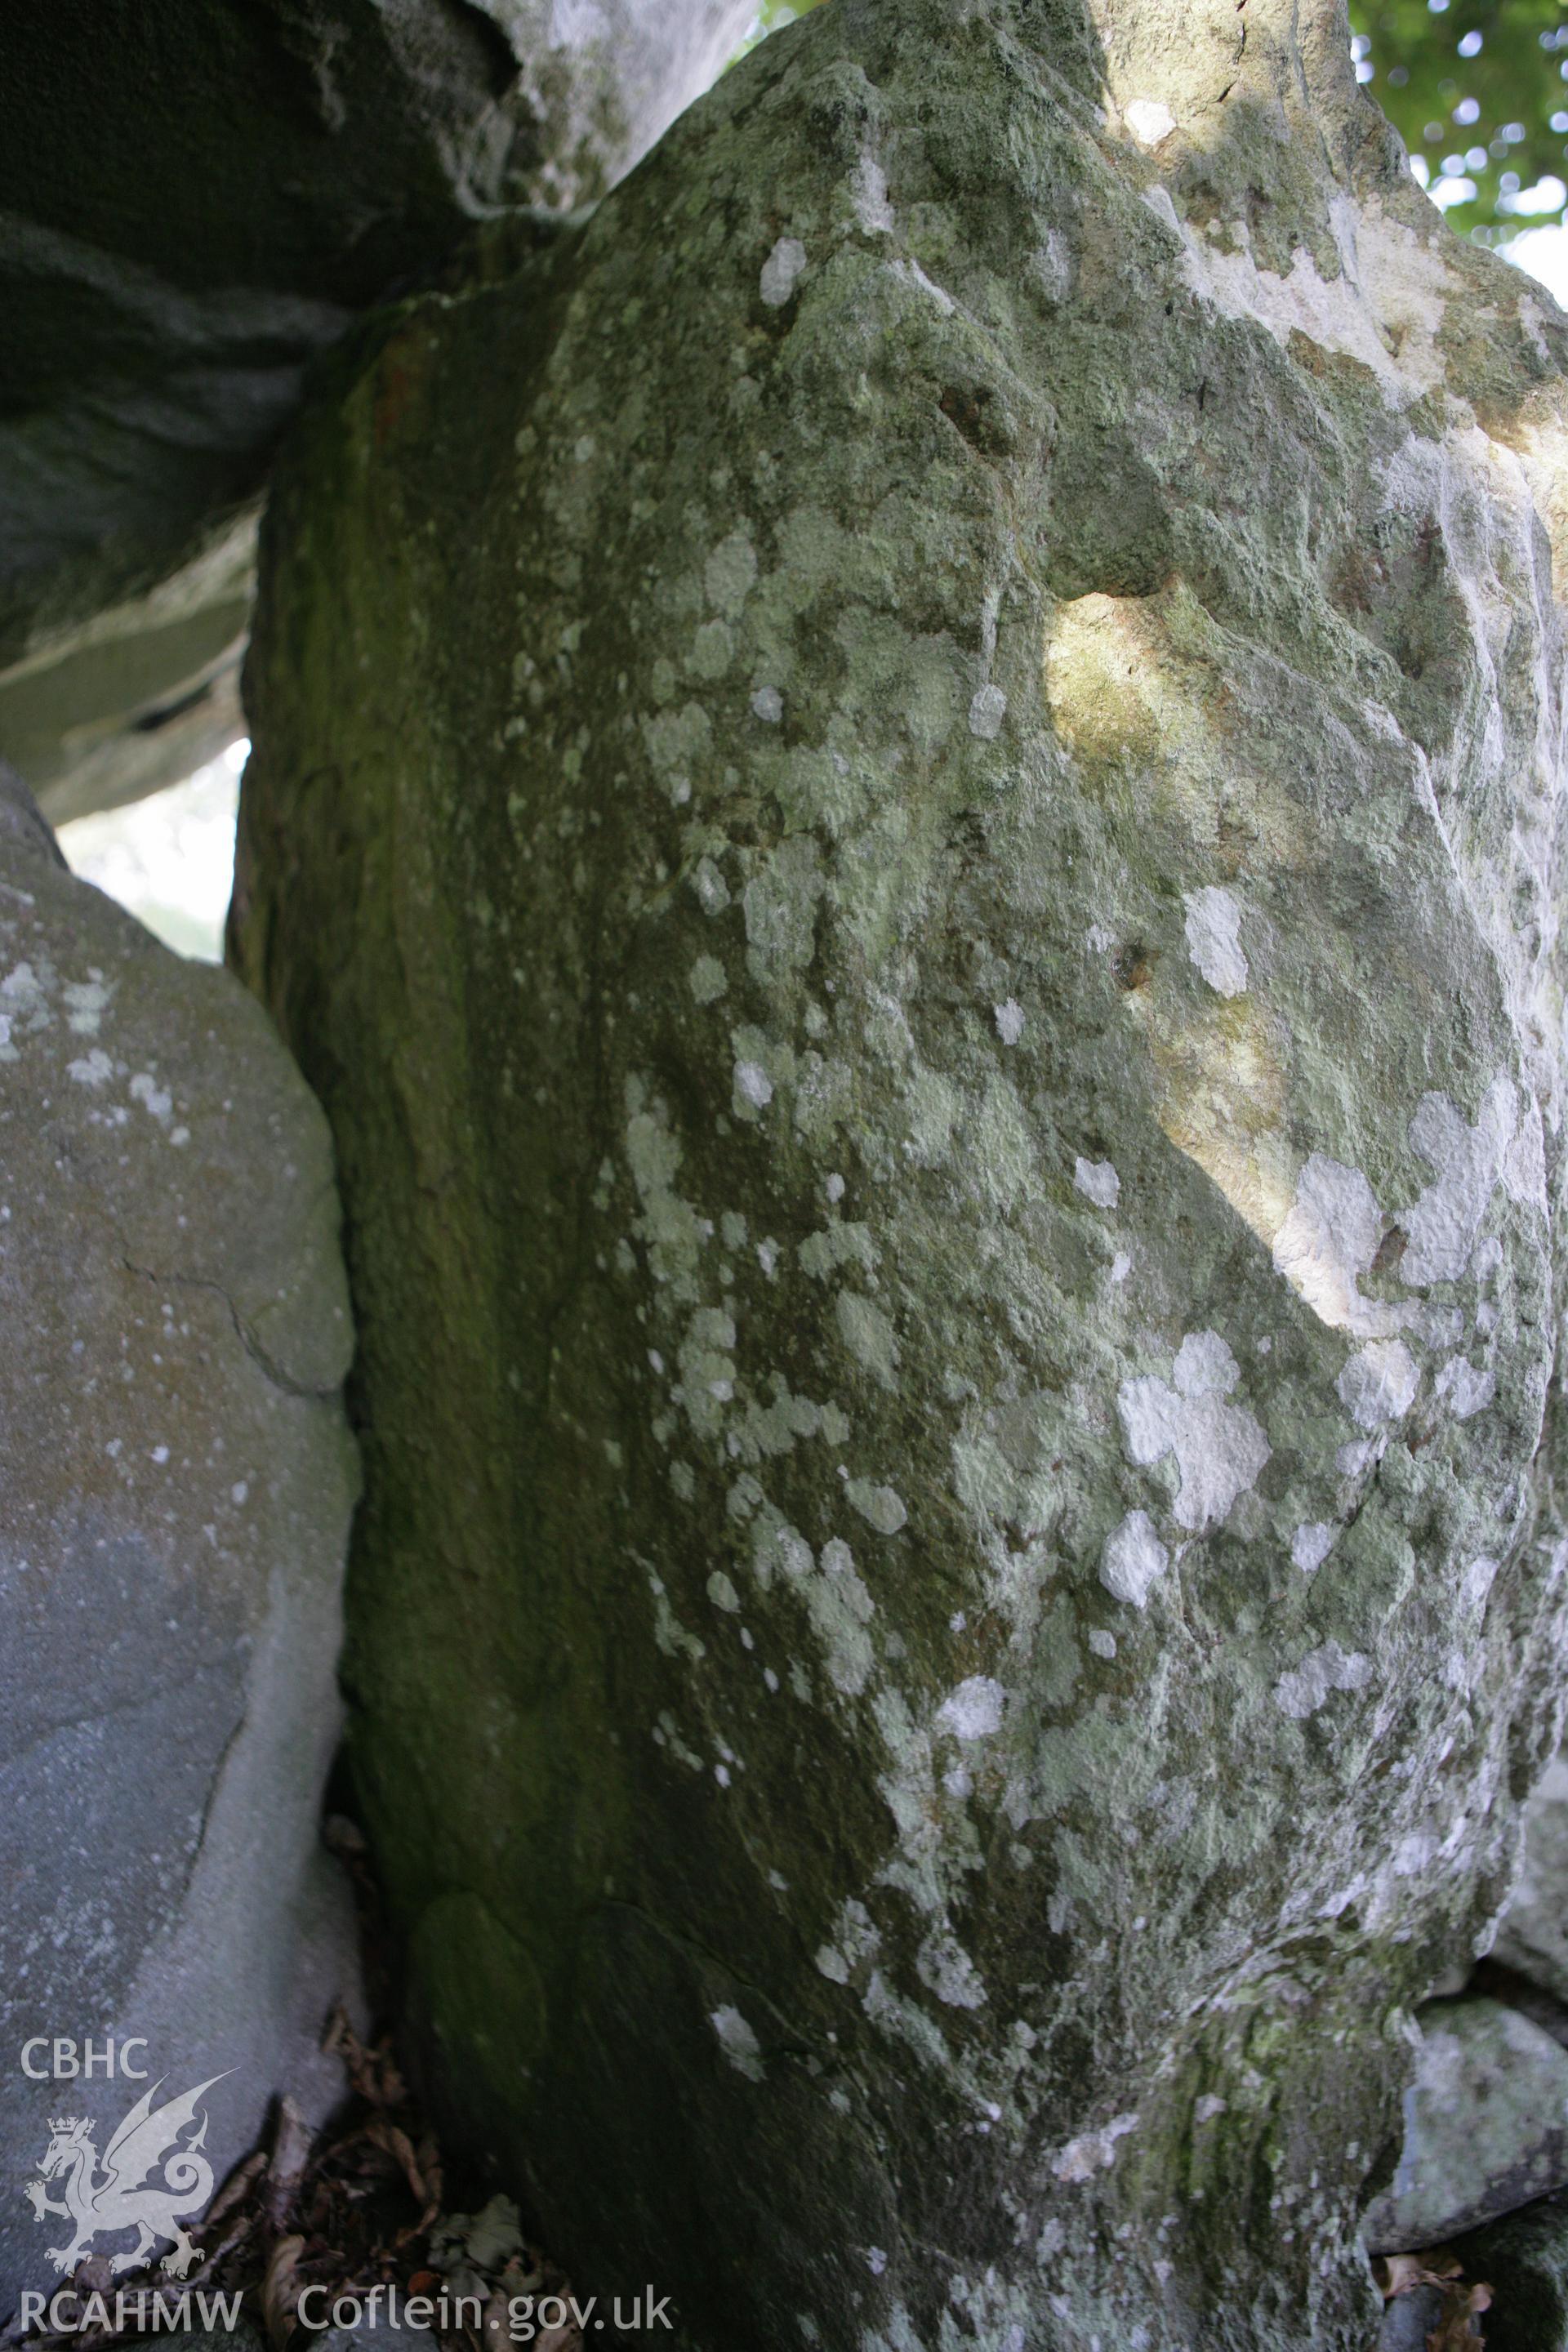 View of cup-mark on portal stone of western tomb